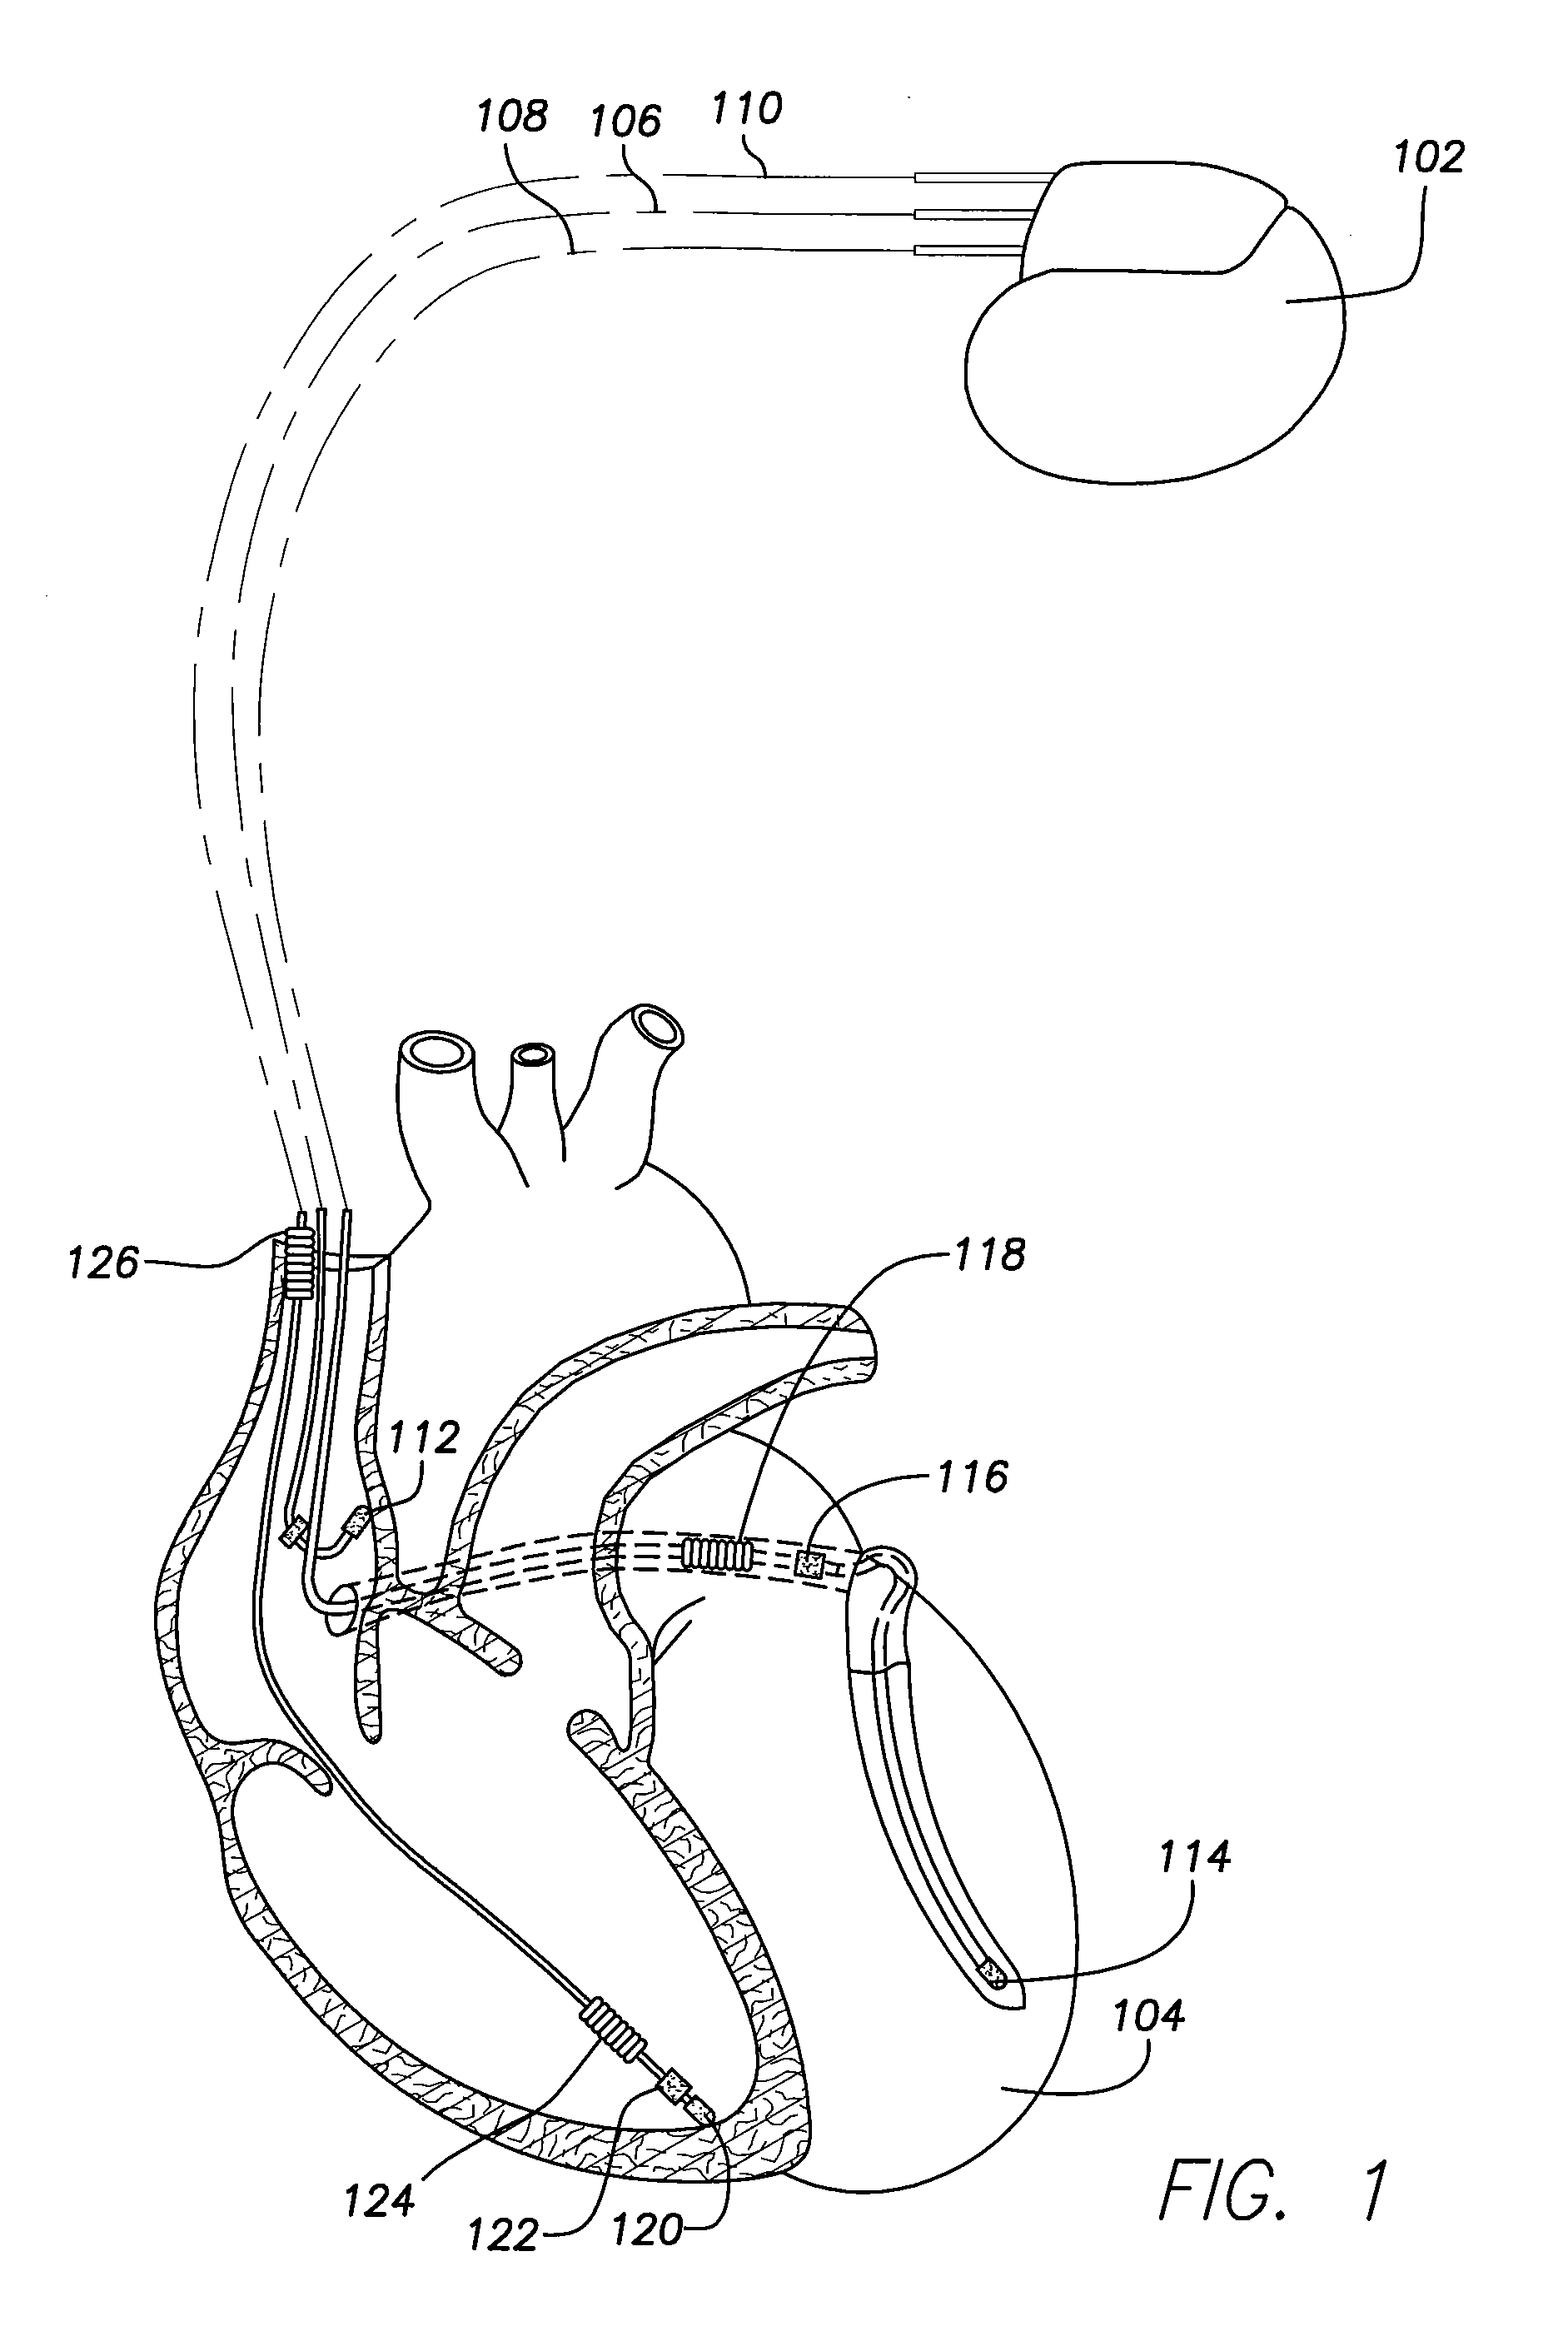 System and method for reducing pain in a high-voltage lead impedance check procedure using DC voltage or current in an implantable medical device